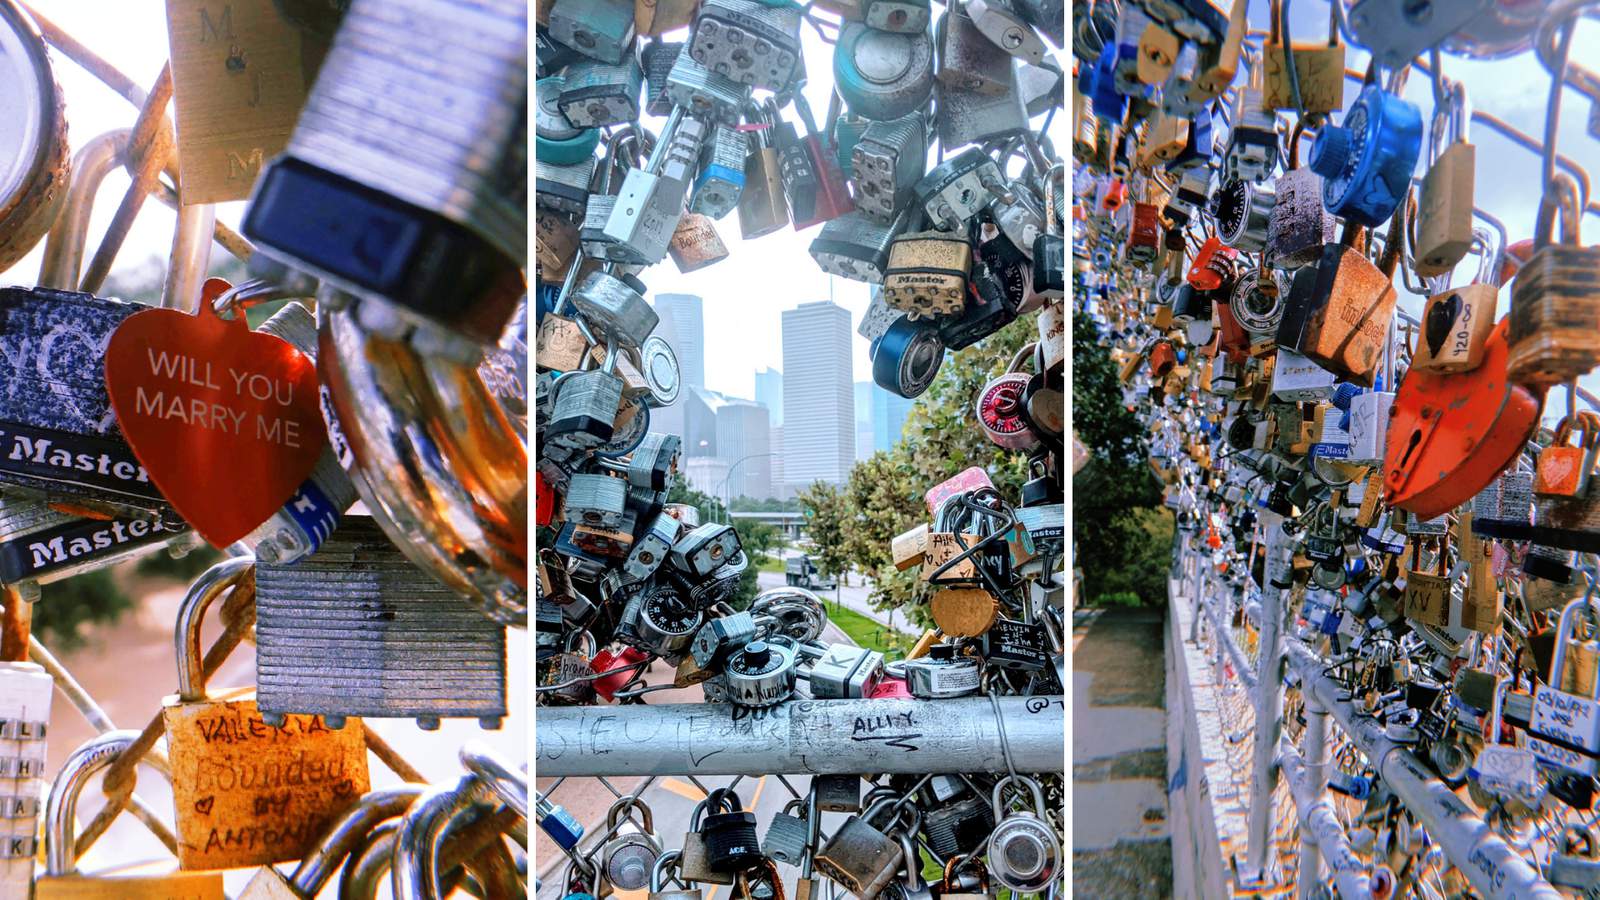 Clanking with love: Did you know Houston has its very own love lock bridge?